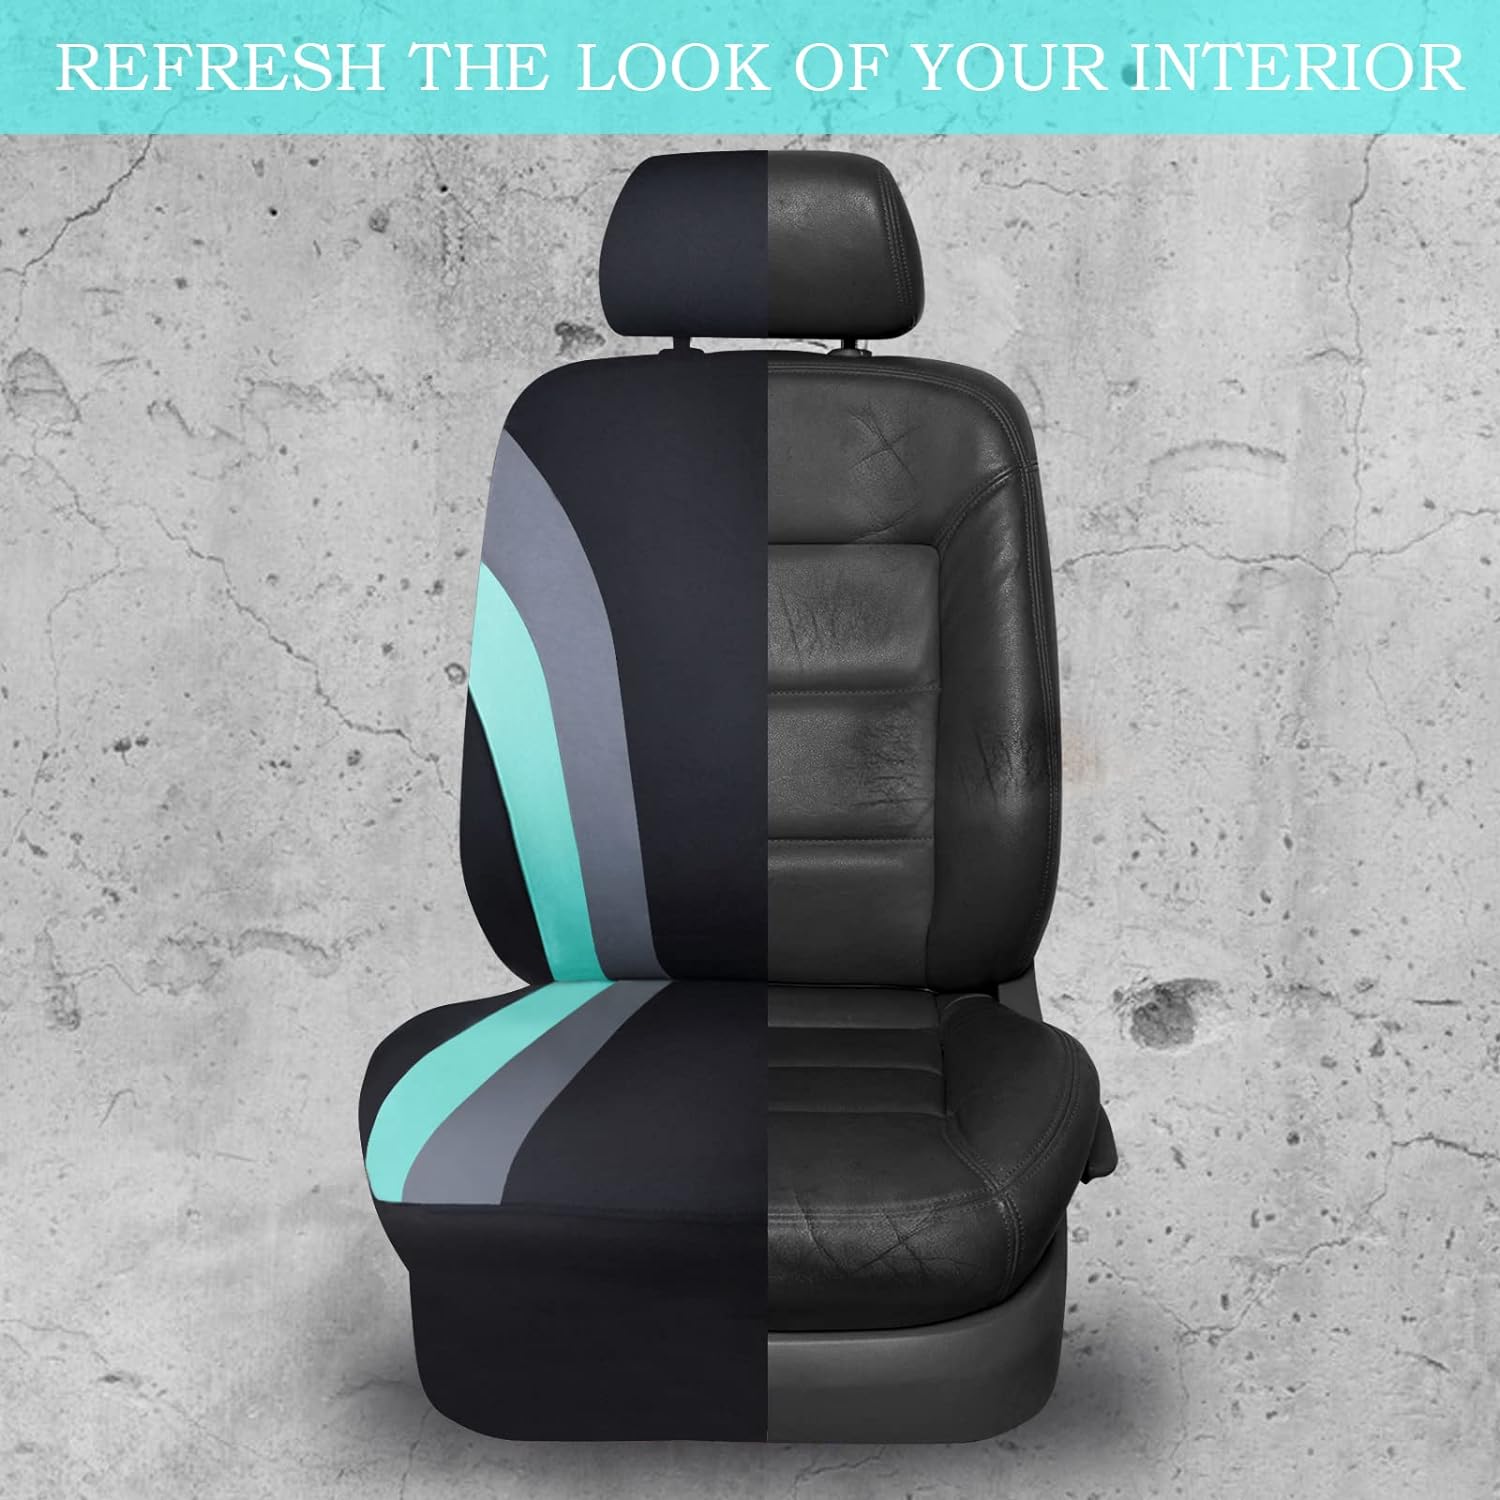 CAR PASS Line Rider Sporty Steering Wheel Cover and Car Seat Cover Sets. 11PCS Universal Fit Car Seat Cover with 14.5-15 Inch Steering Wheel Cover.(Black and Mint)